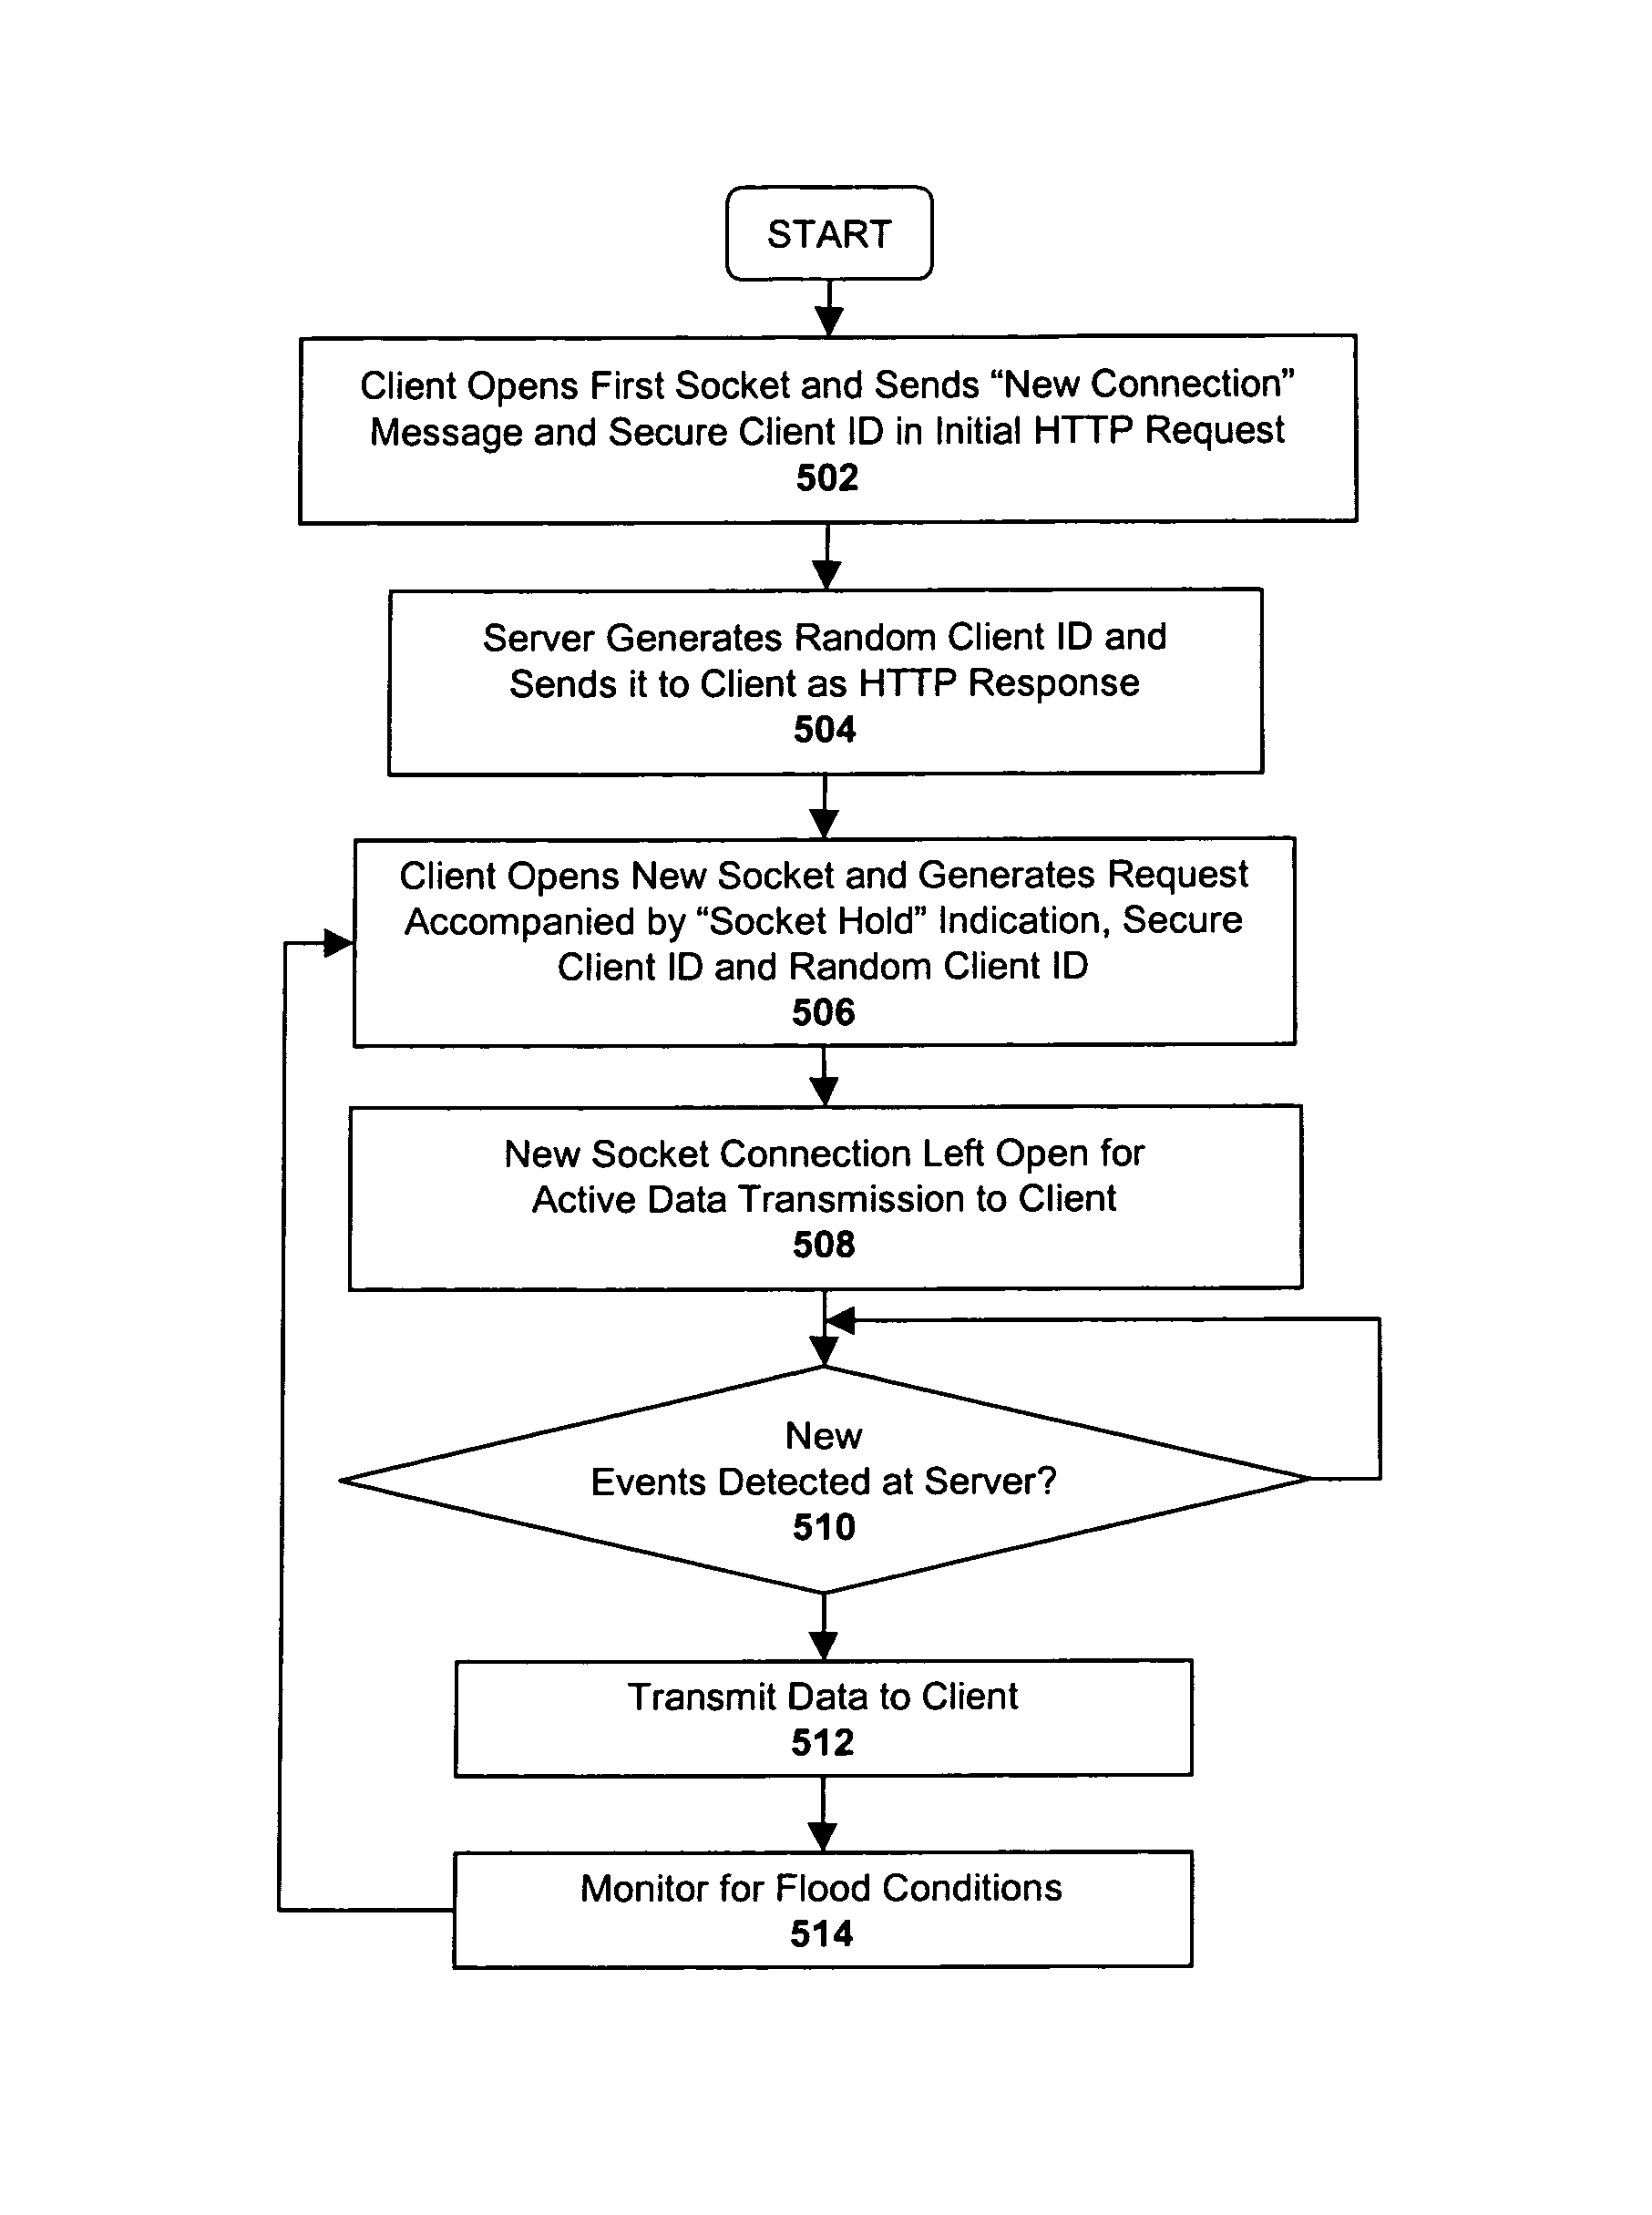 Tunneling apparatus and method for client-server communication